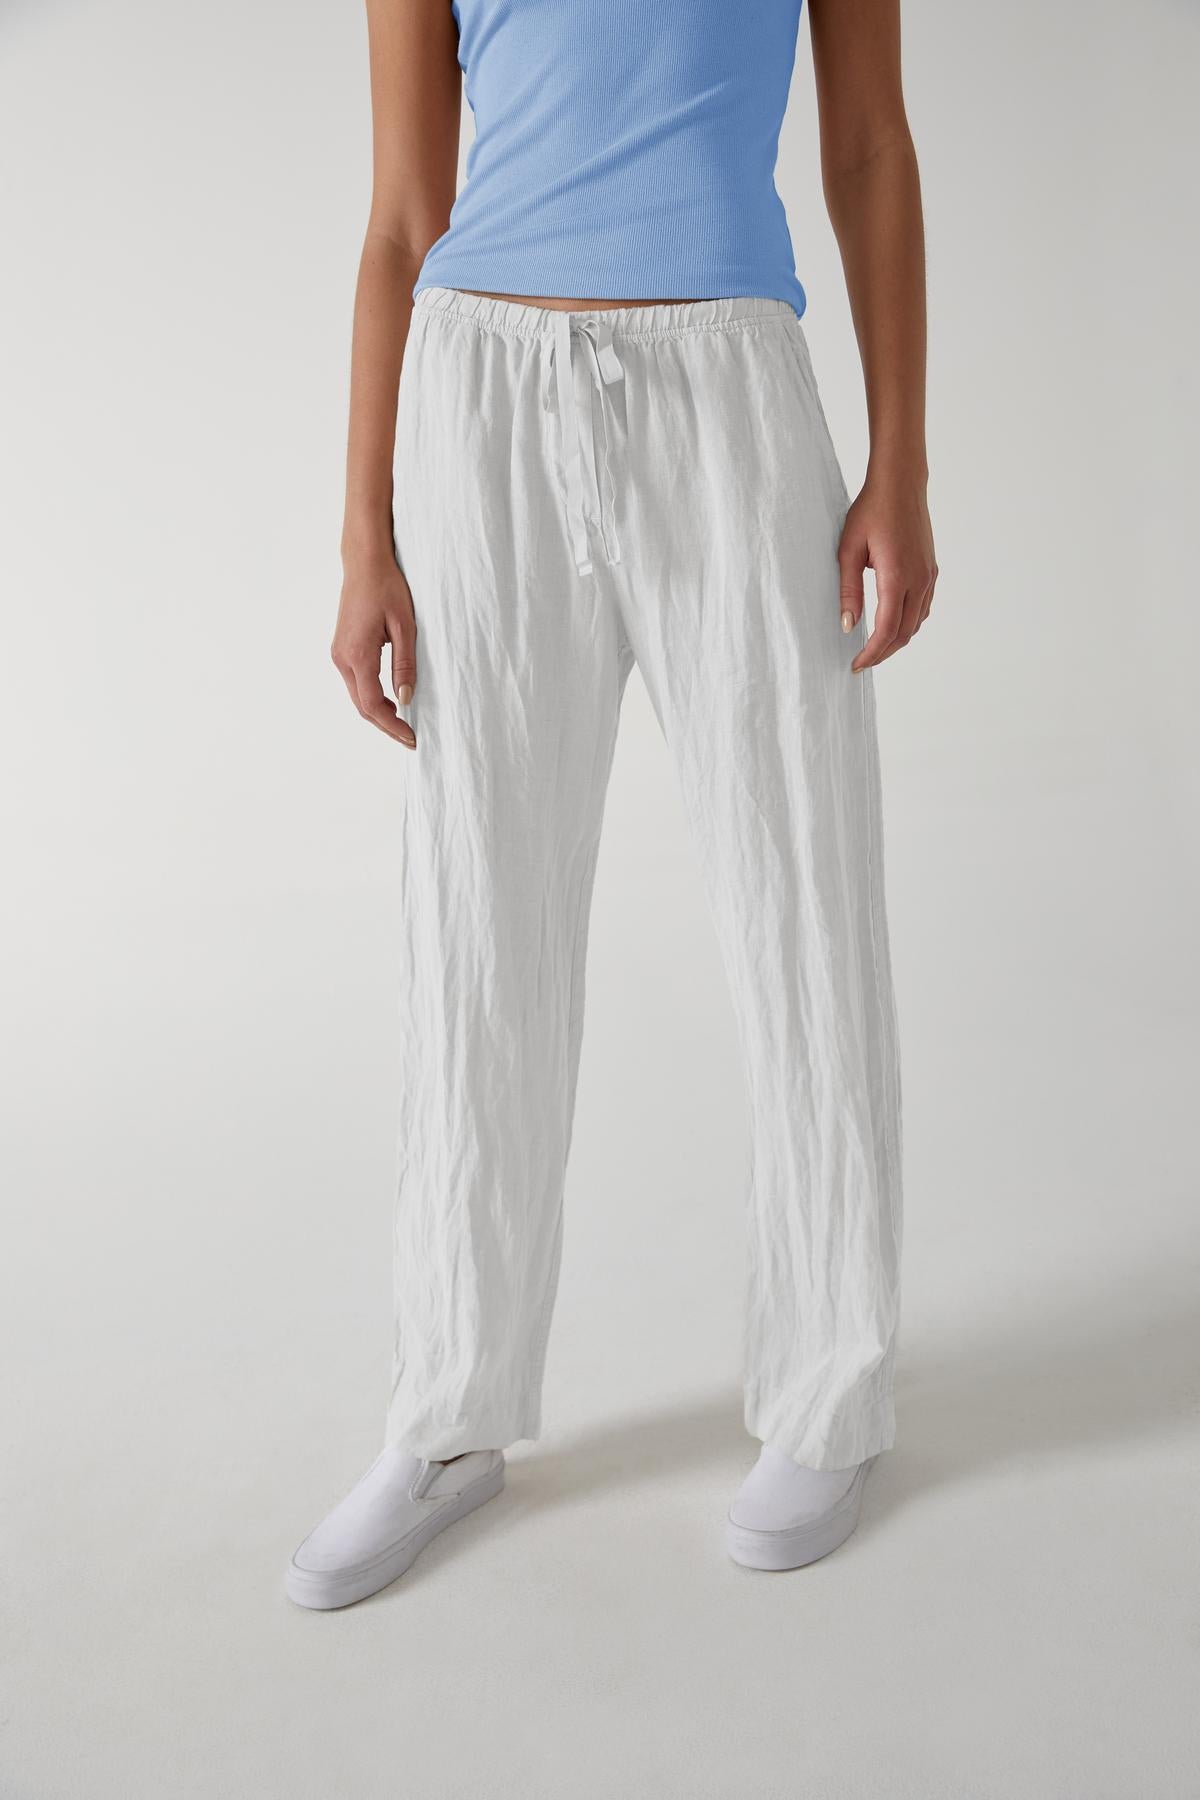 A woman wearing Velvet by Jenny Graham's PICO PANT and a blue t-shirt.-36168897724609